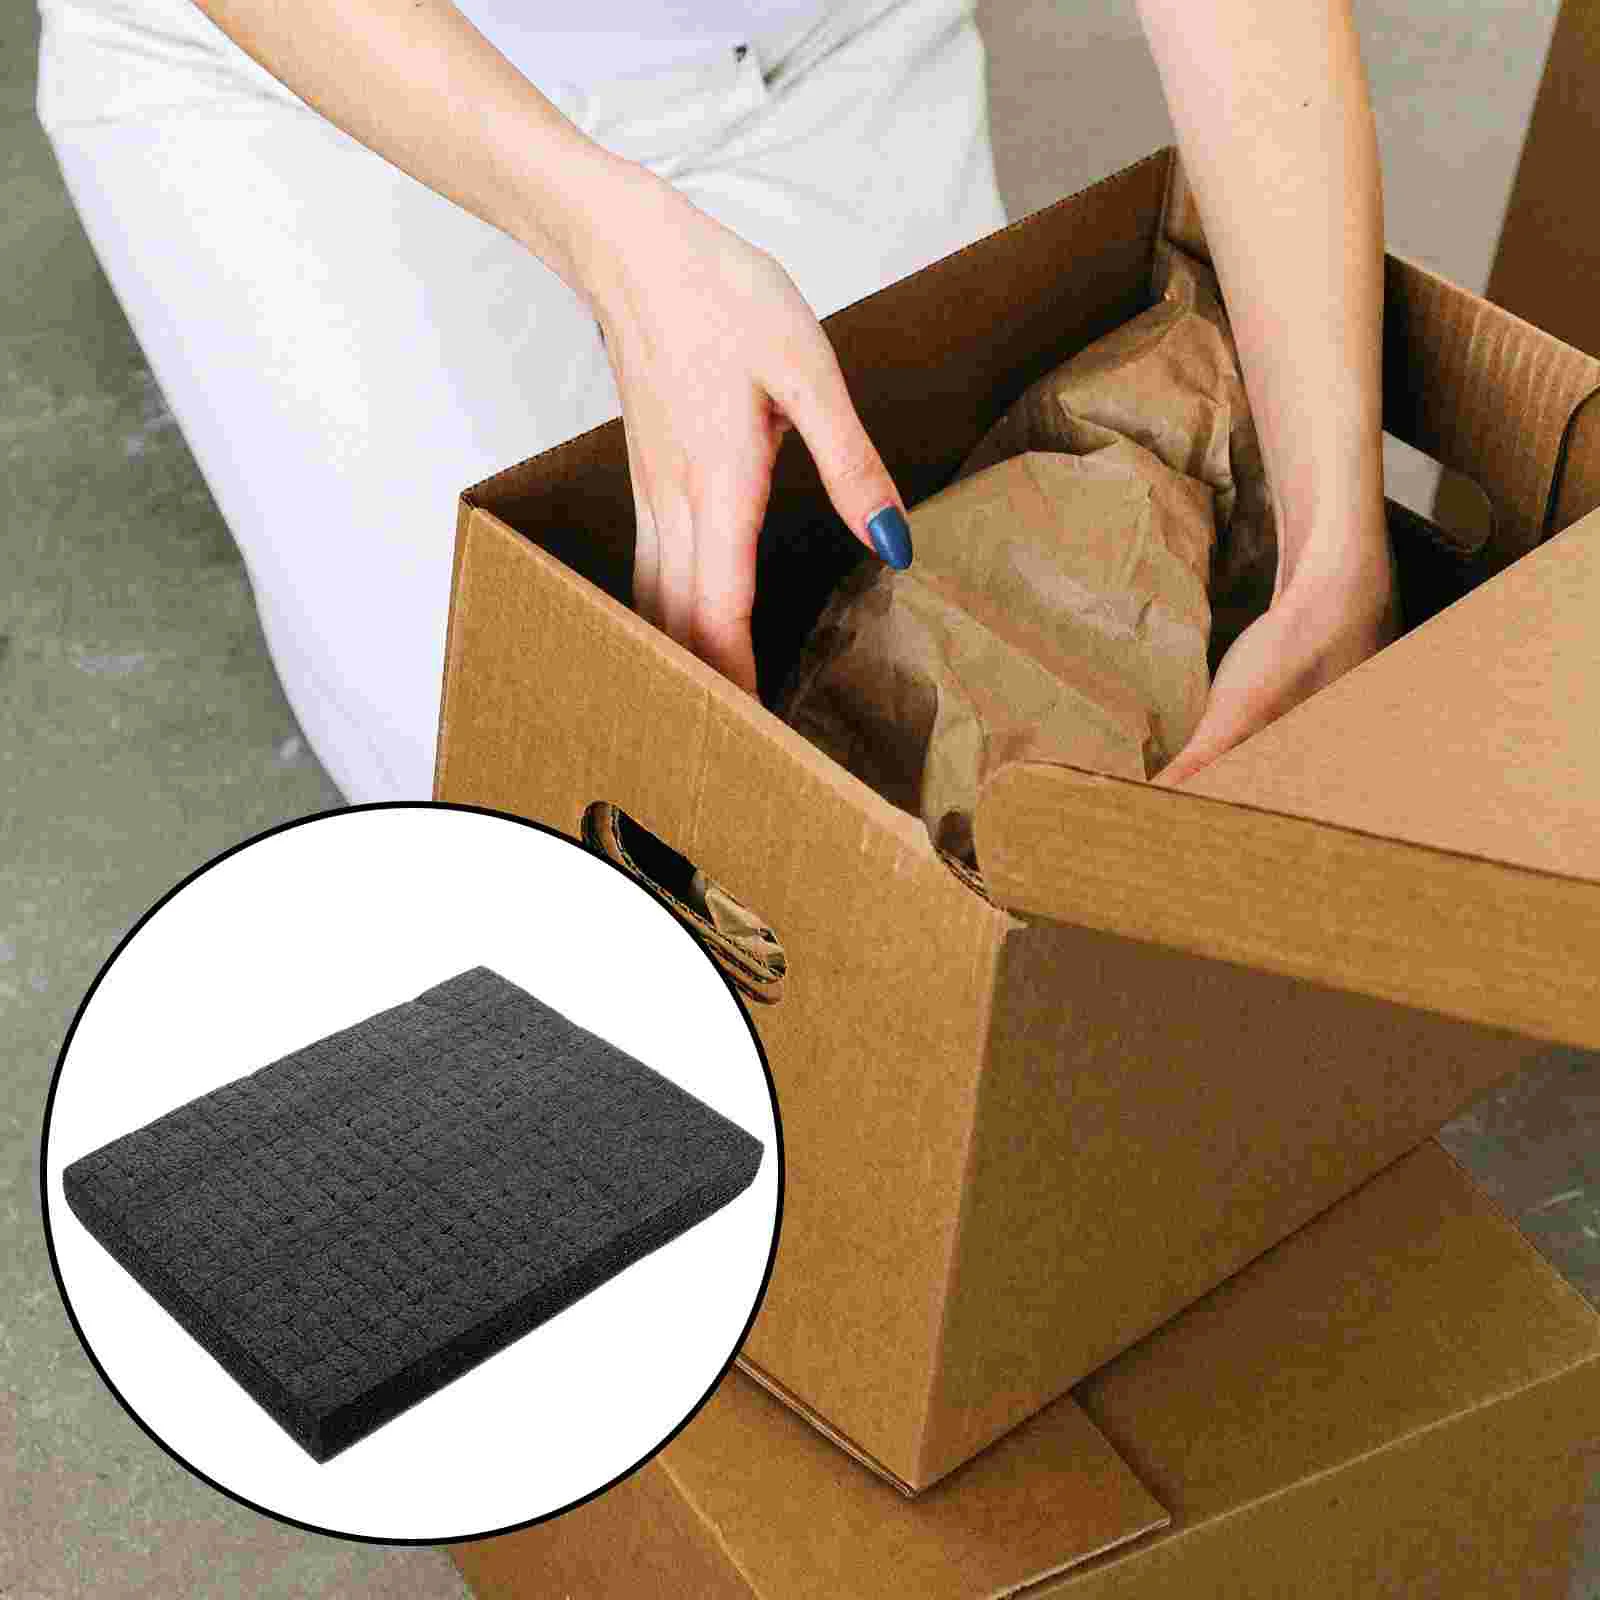 

Cube Foam Delivery Packaging Inserts Cases Pad Cubes Board Gap Filler Block Packing Black